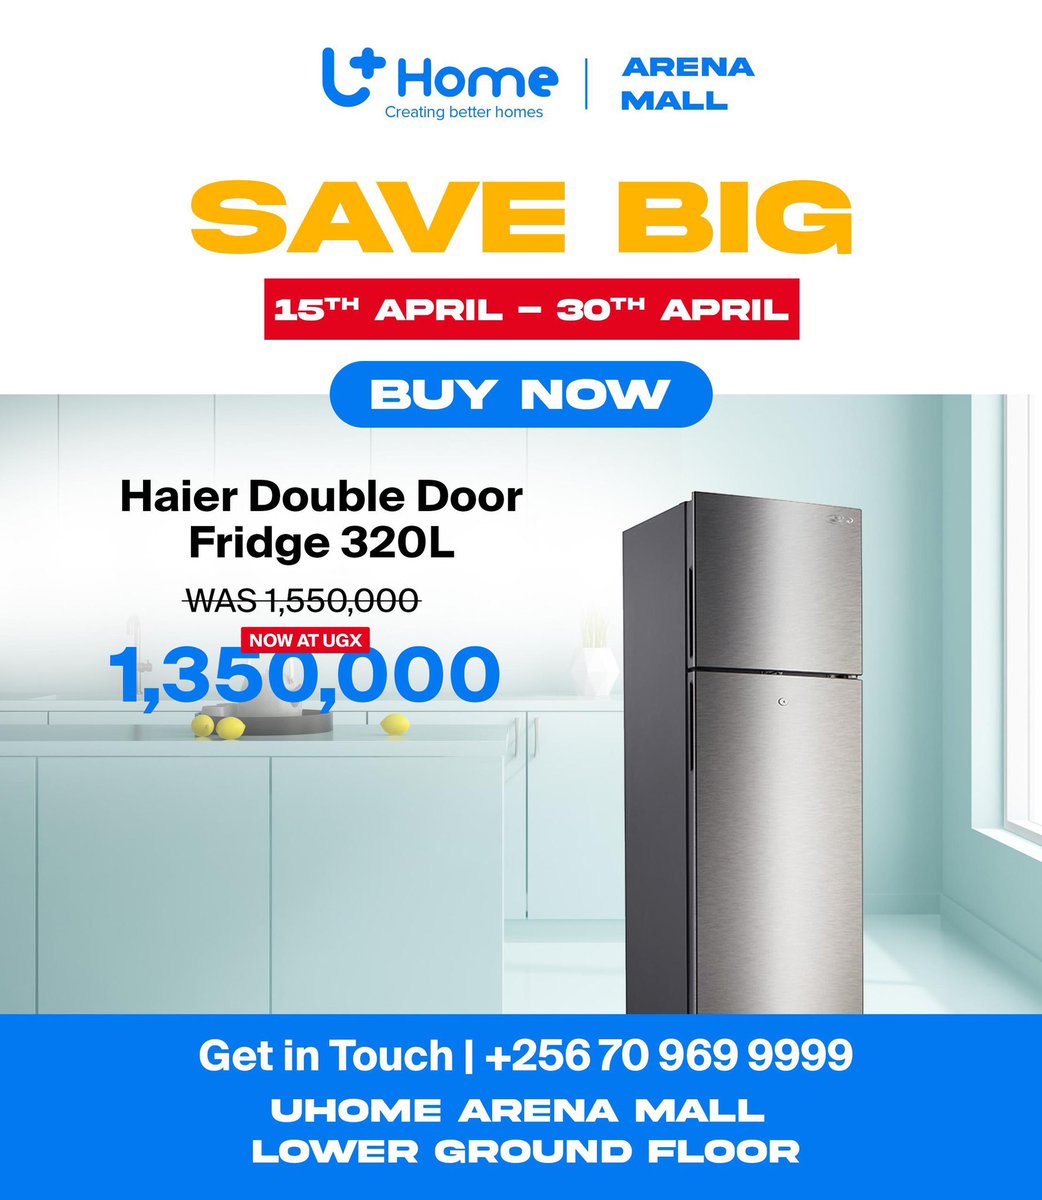 Good morning, kindly get the Haier Double Door Fridge for only 1,350,000 UGX, reduced from 1,550,000 UGX😉 Exclusive discounts available from
@UhomeUganda
at #UhomeArenaMall. Offer valid until 30th April, 2024. Don't miss out, limited time offer! #UhomeDiscounts